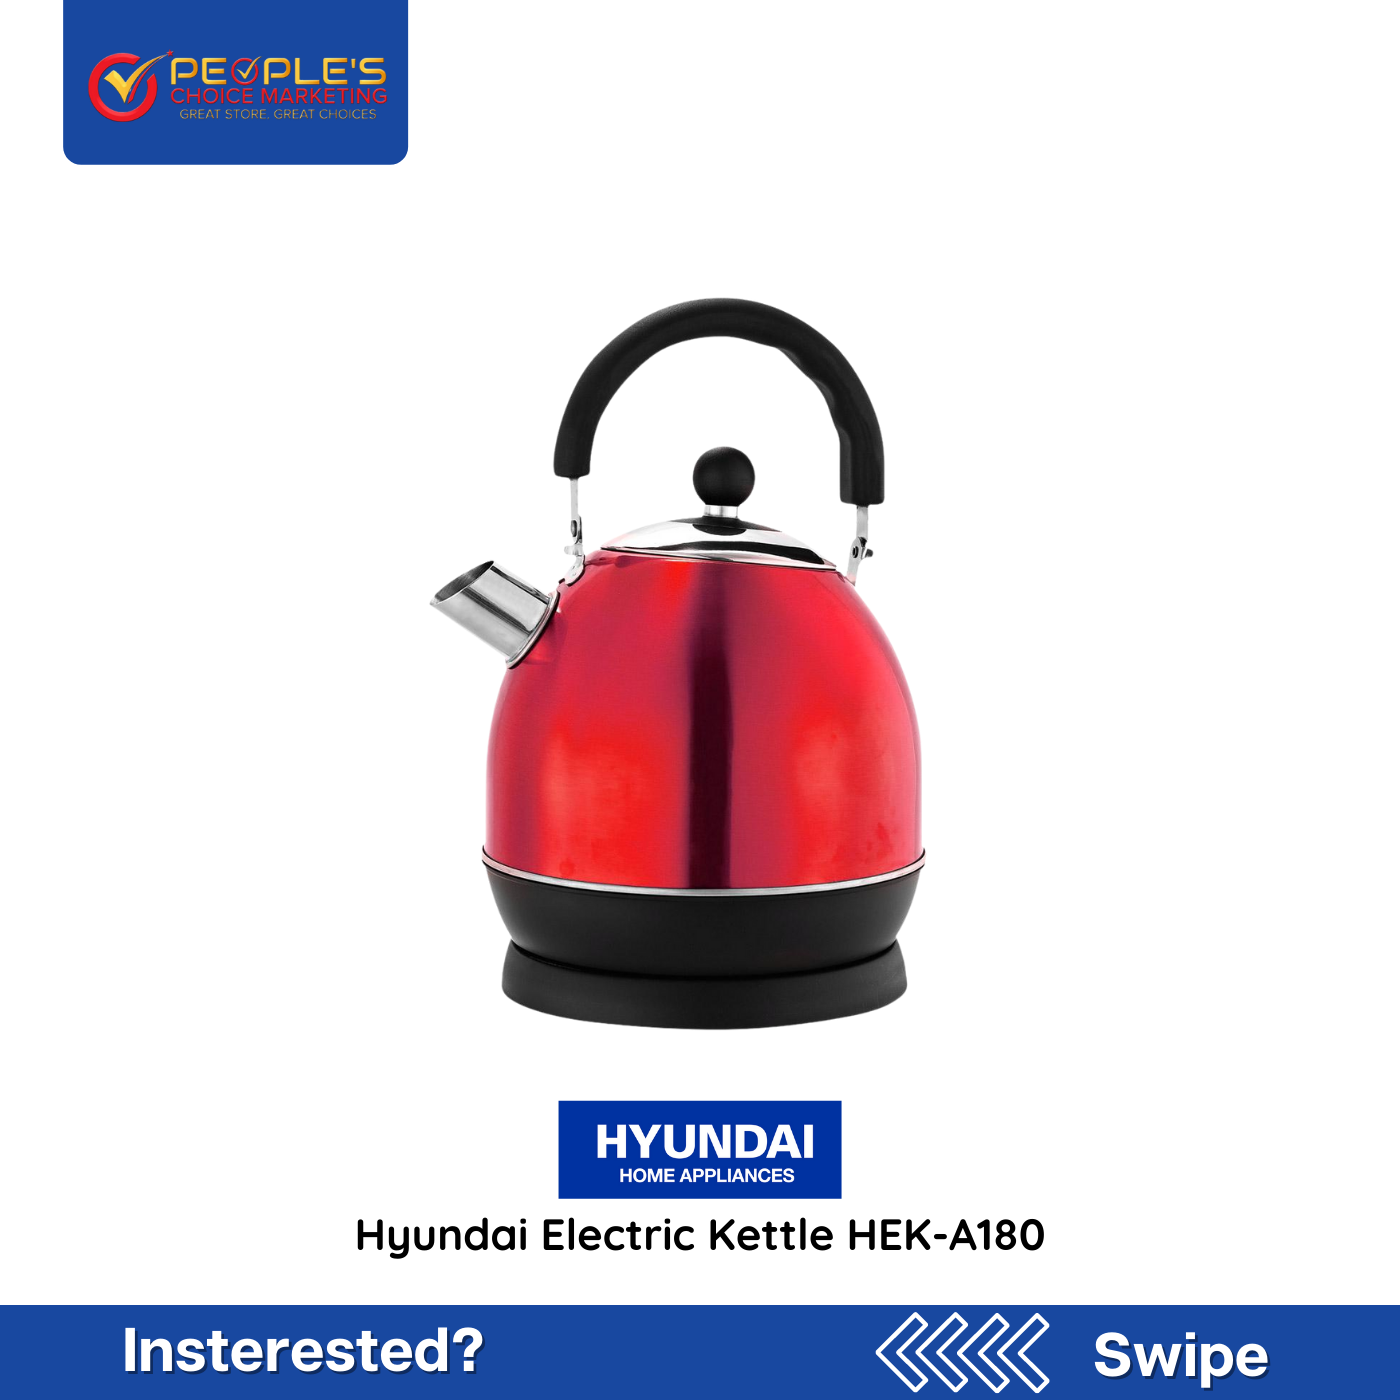 Hyundai 1.8L Capacity Stainless Steel Body Electric Kettle HEK-A180